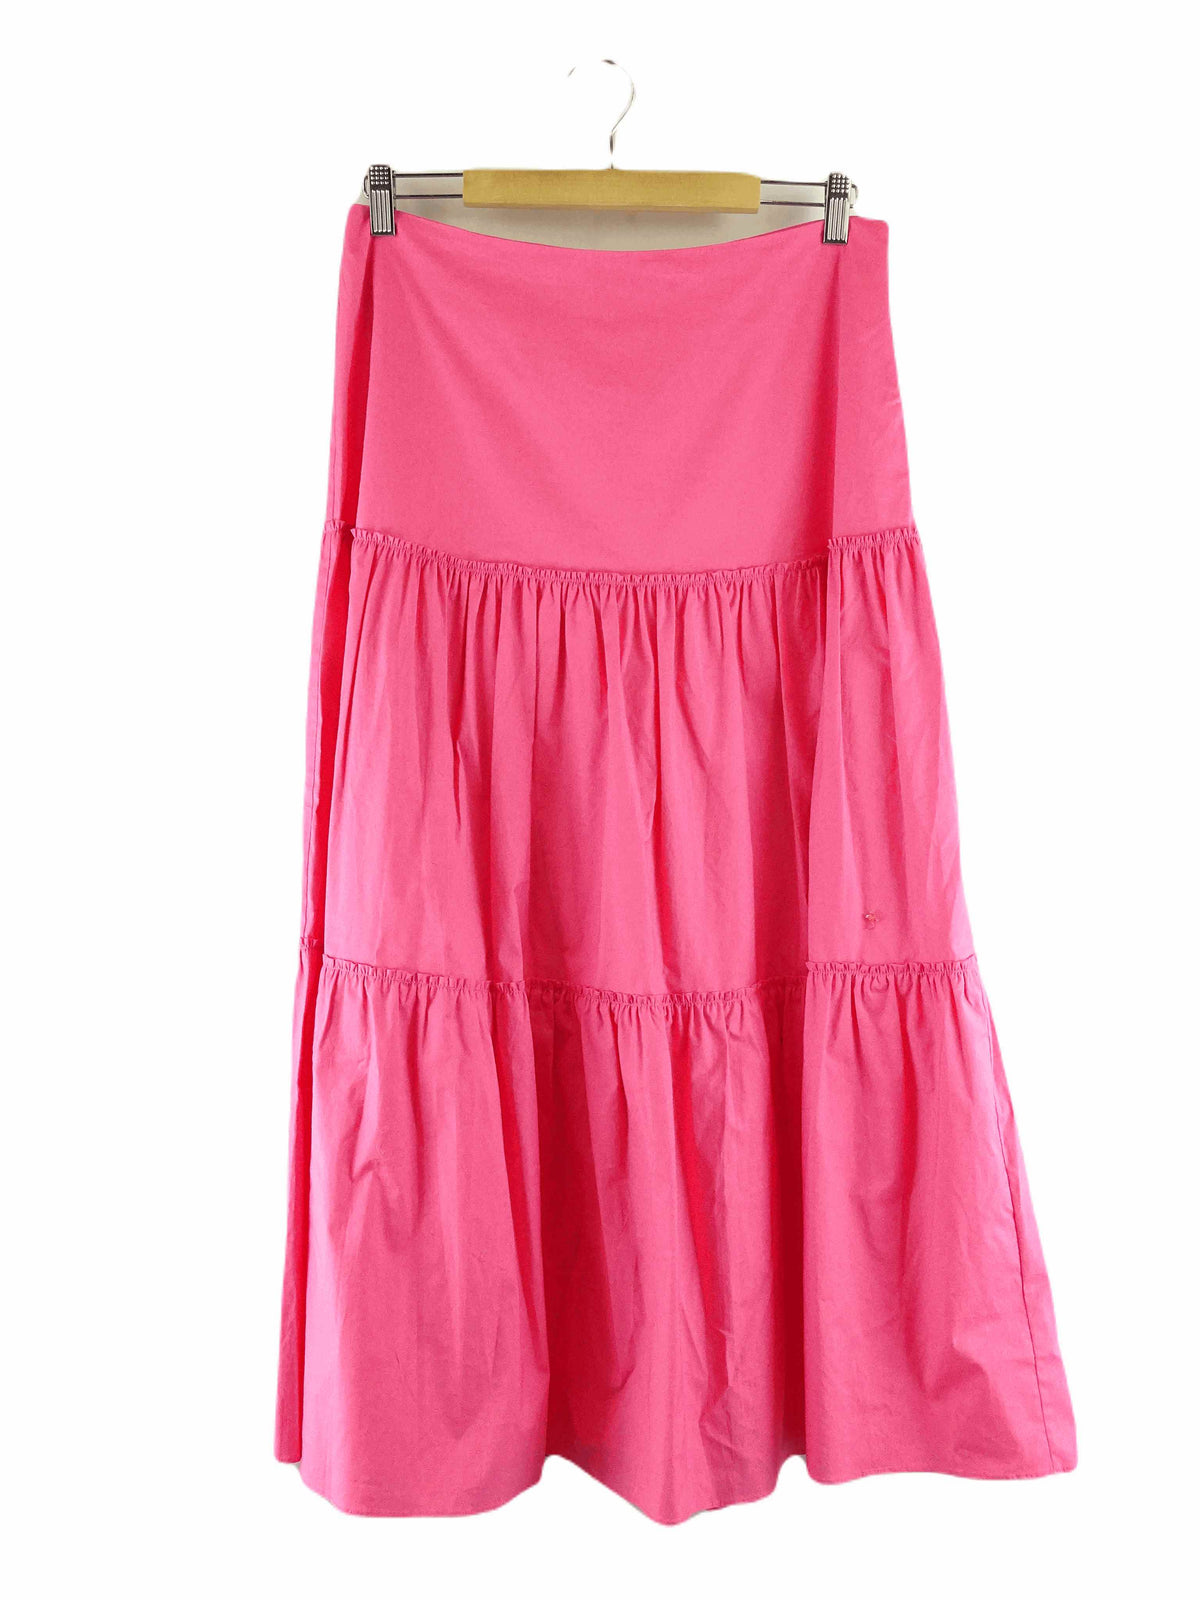 Witchery Pink Skirt 10